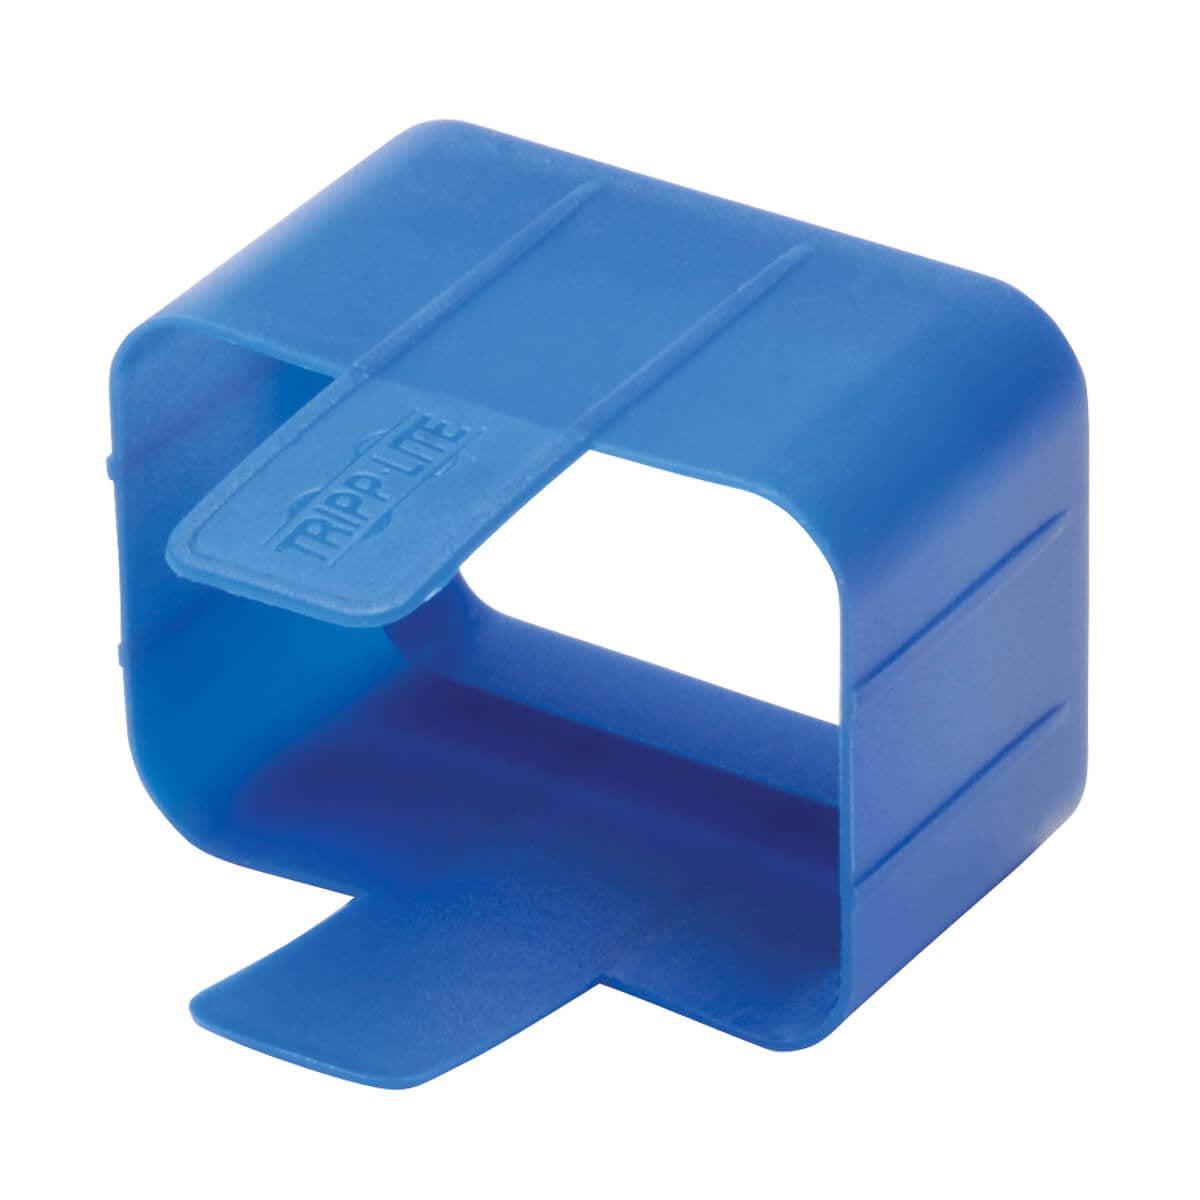 Tripp Lite Plc19Bl Plug-Lock Inserts (C20 Power Cord To C19 Outlet), Blue, 100 Pack